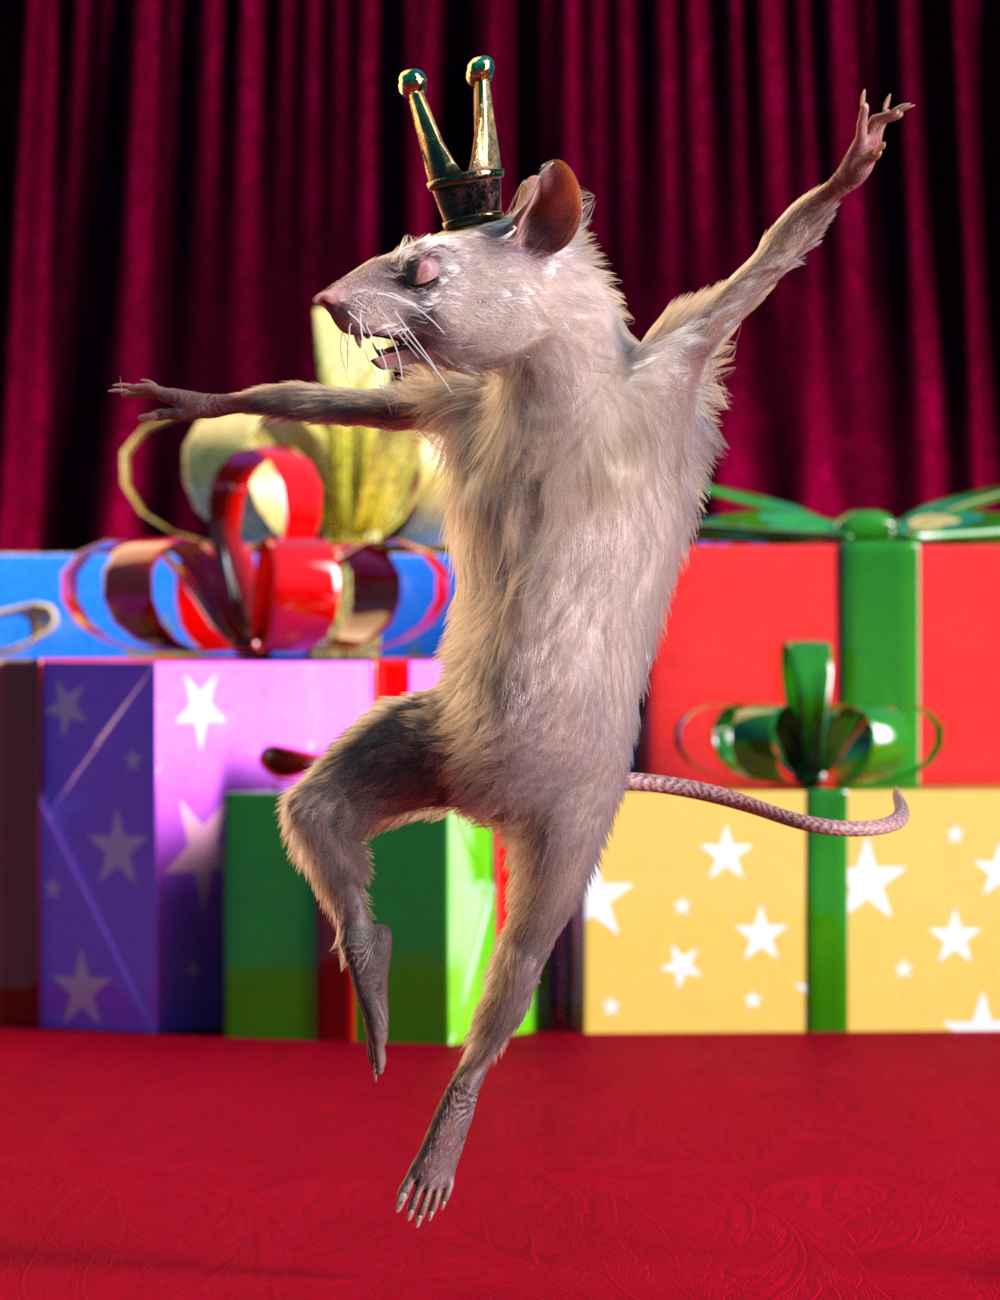 Nutcracker poses for Mouse King by: Ensary, 3D Models by Daz 3D